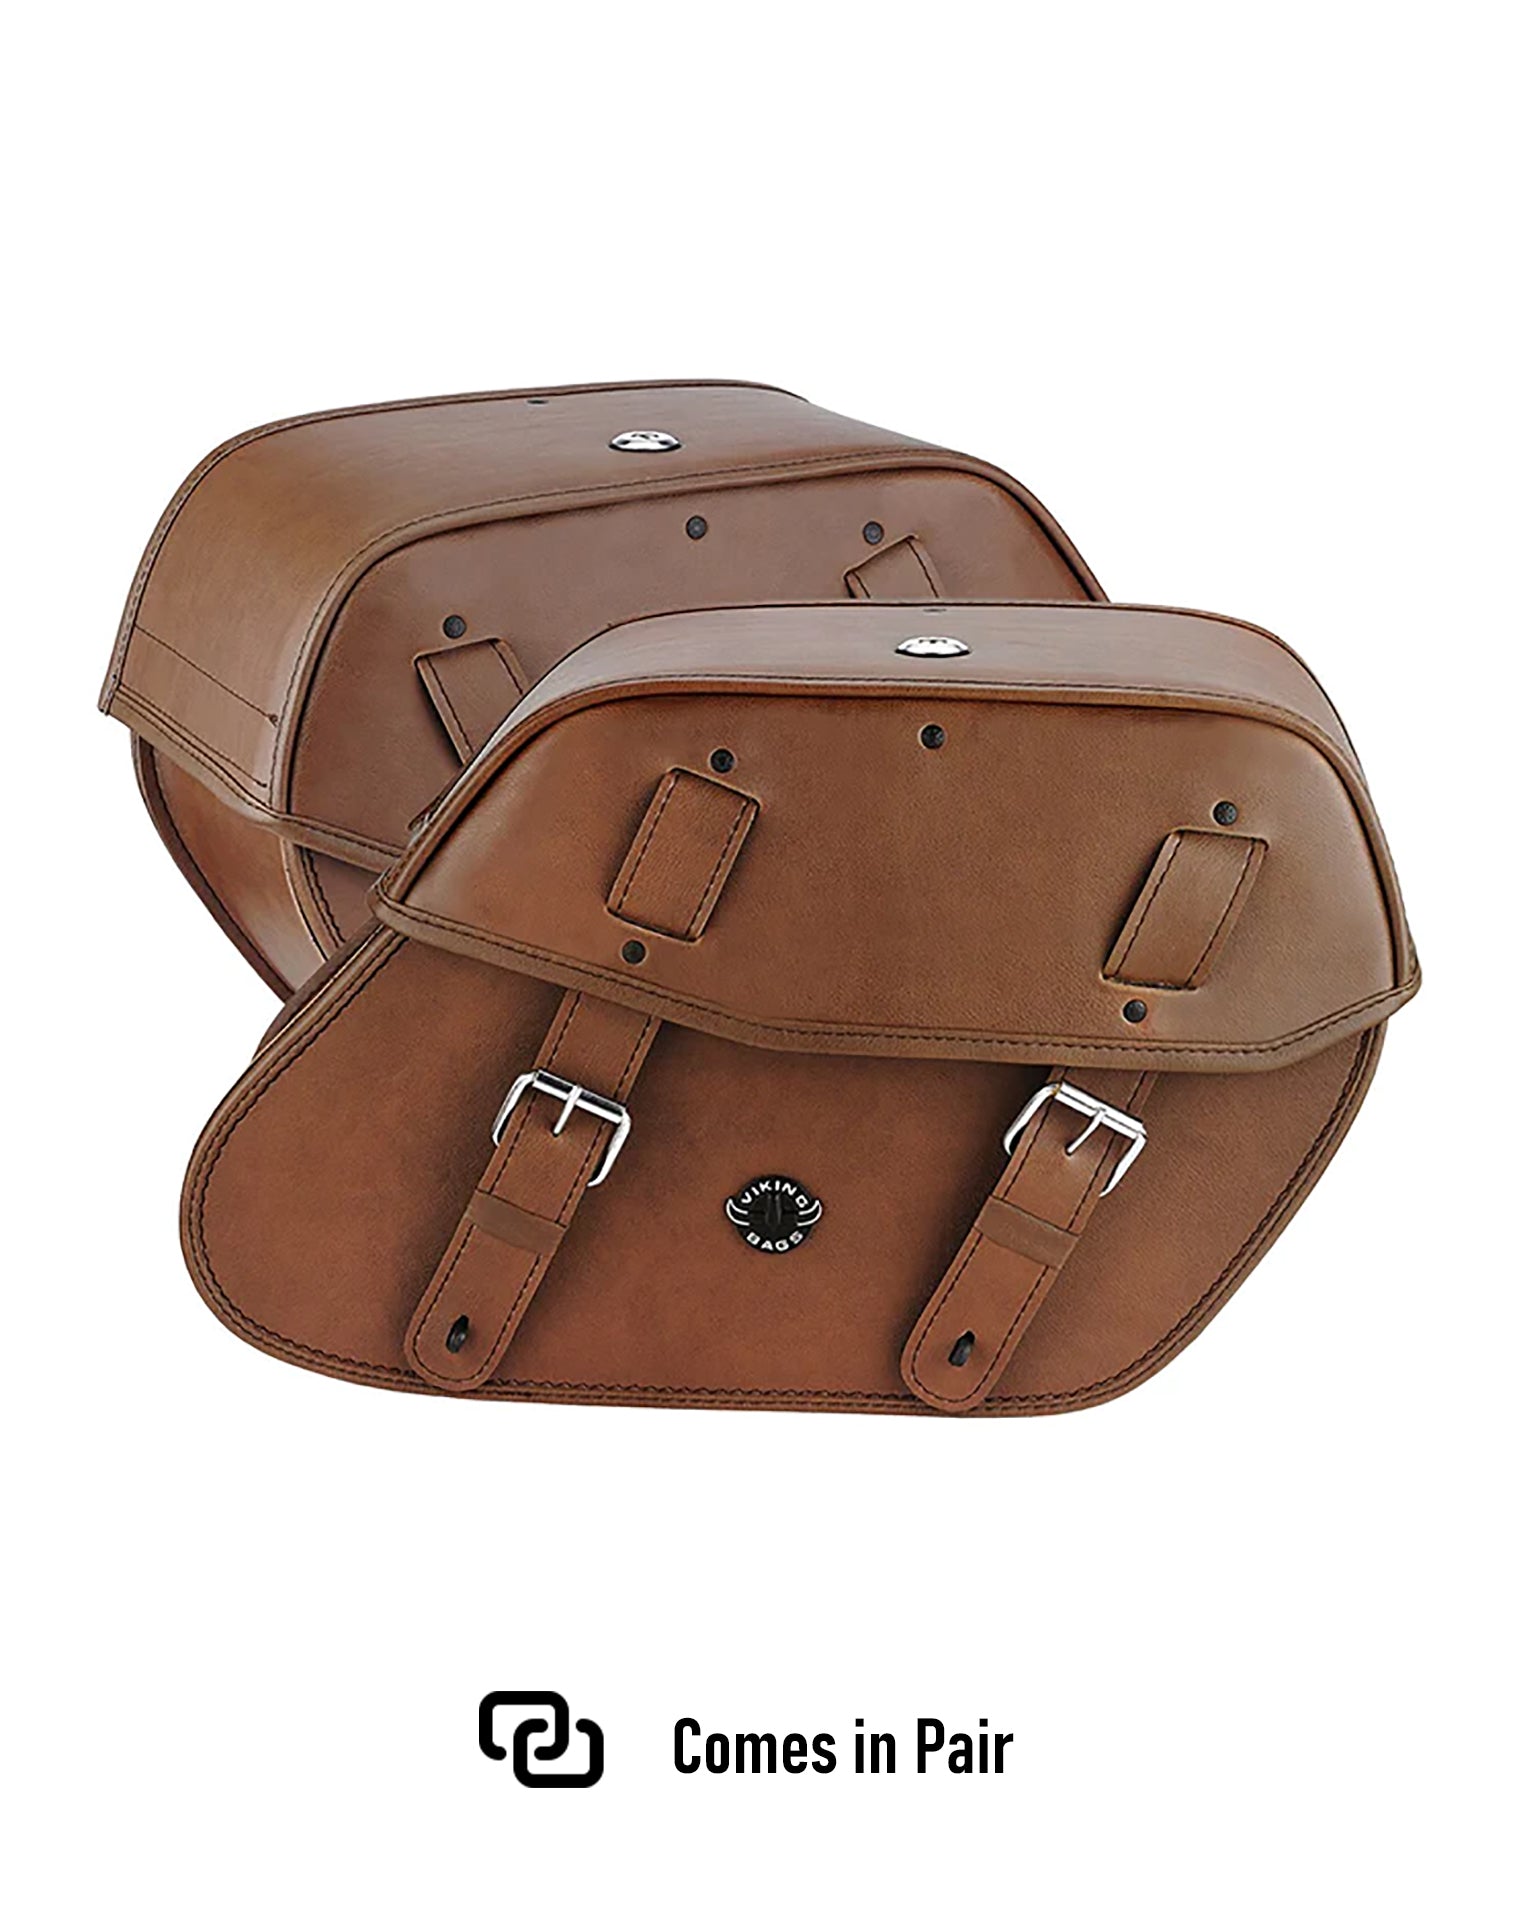 Viking Odin Brown Large Leather Motorcycle Saddlebags For Harley Softail Heritage Flst I C Ci Weather Resistant Bags Comes in Pair